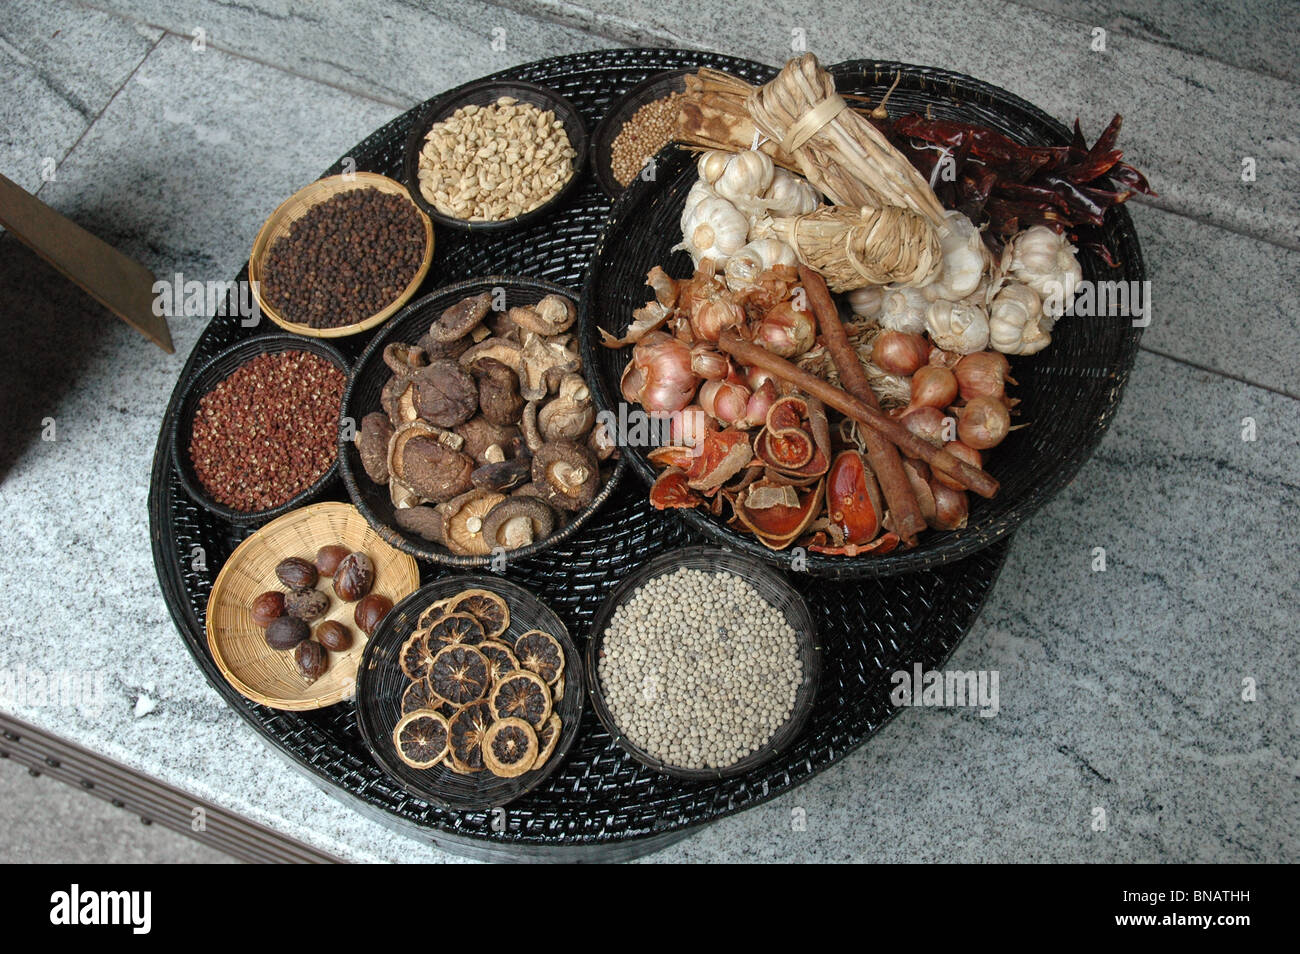 Display of Thai Spices on a dish- Thai Food Stock Photo